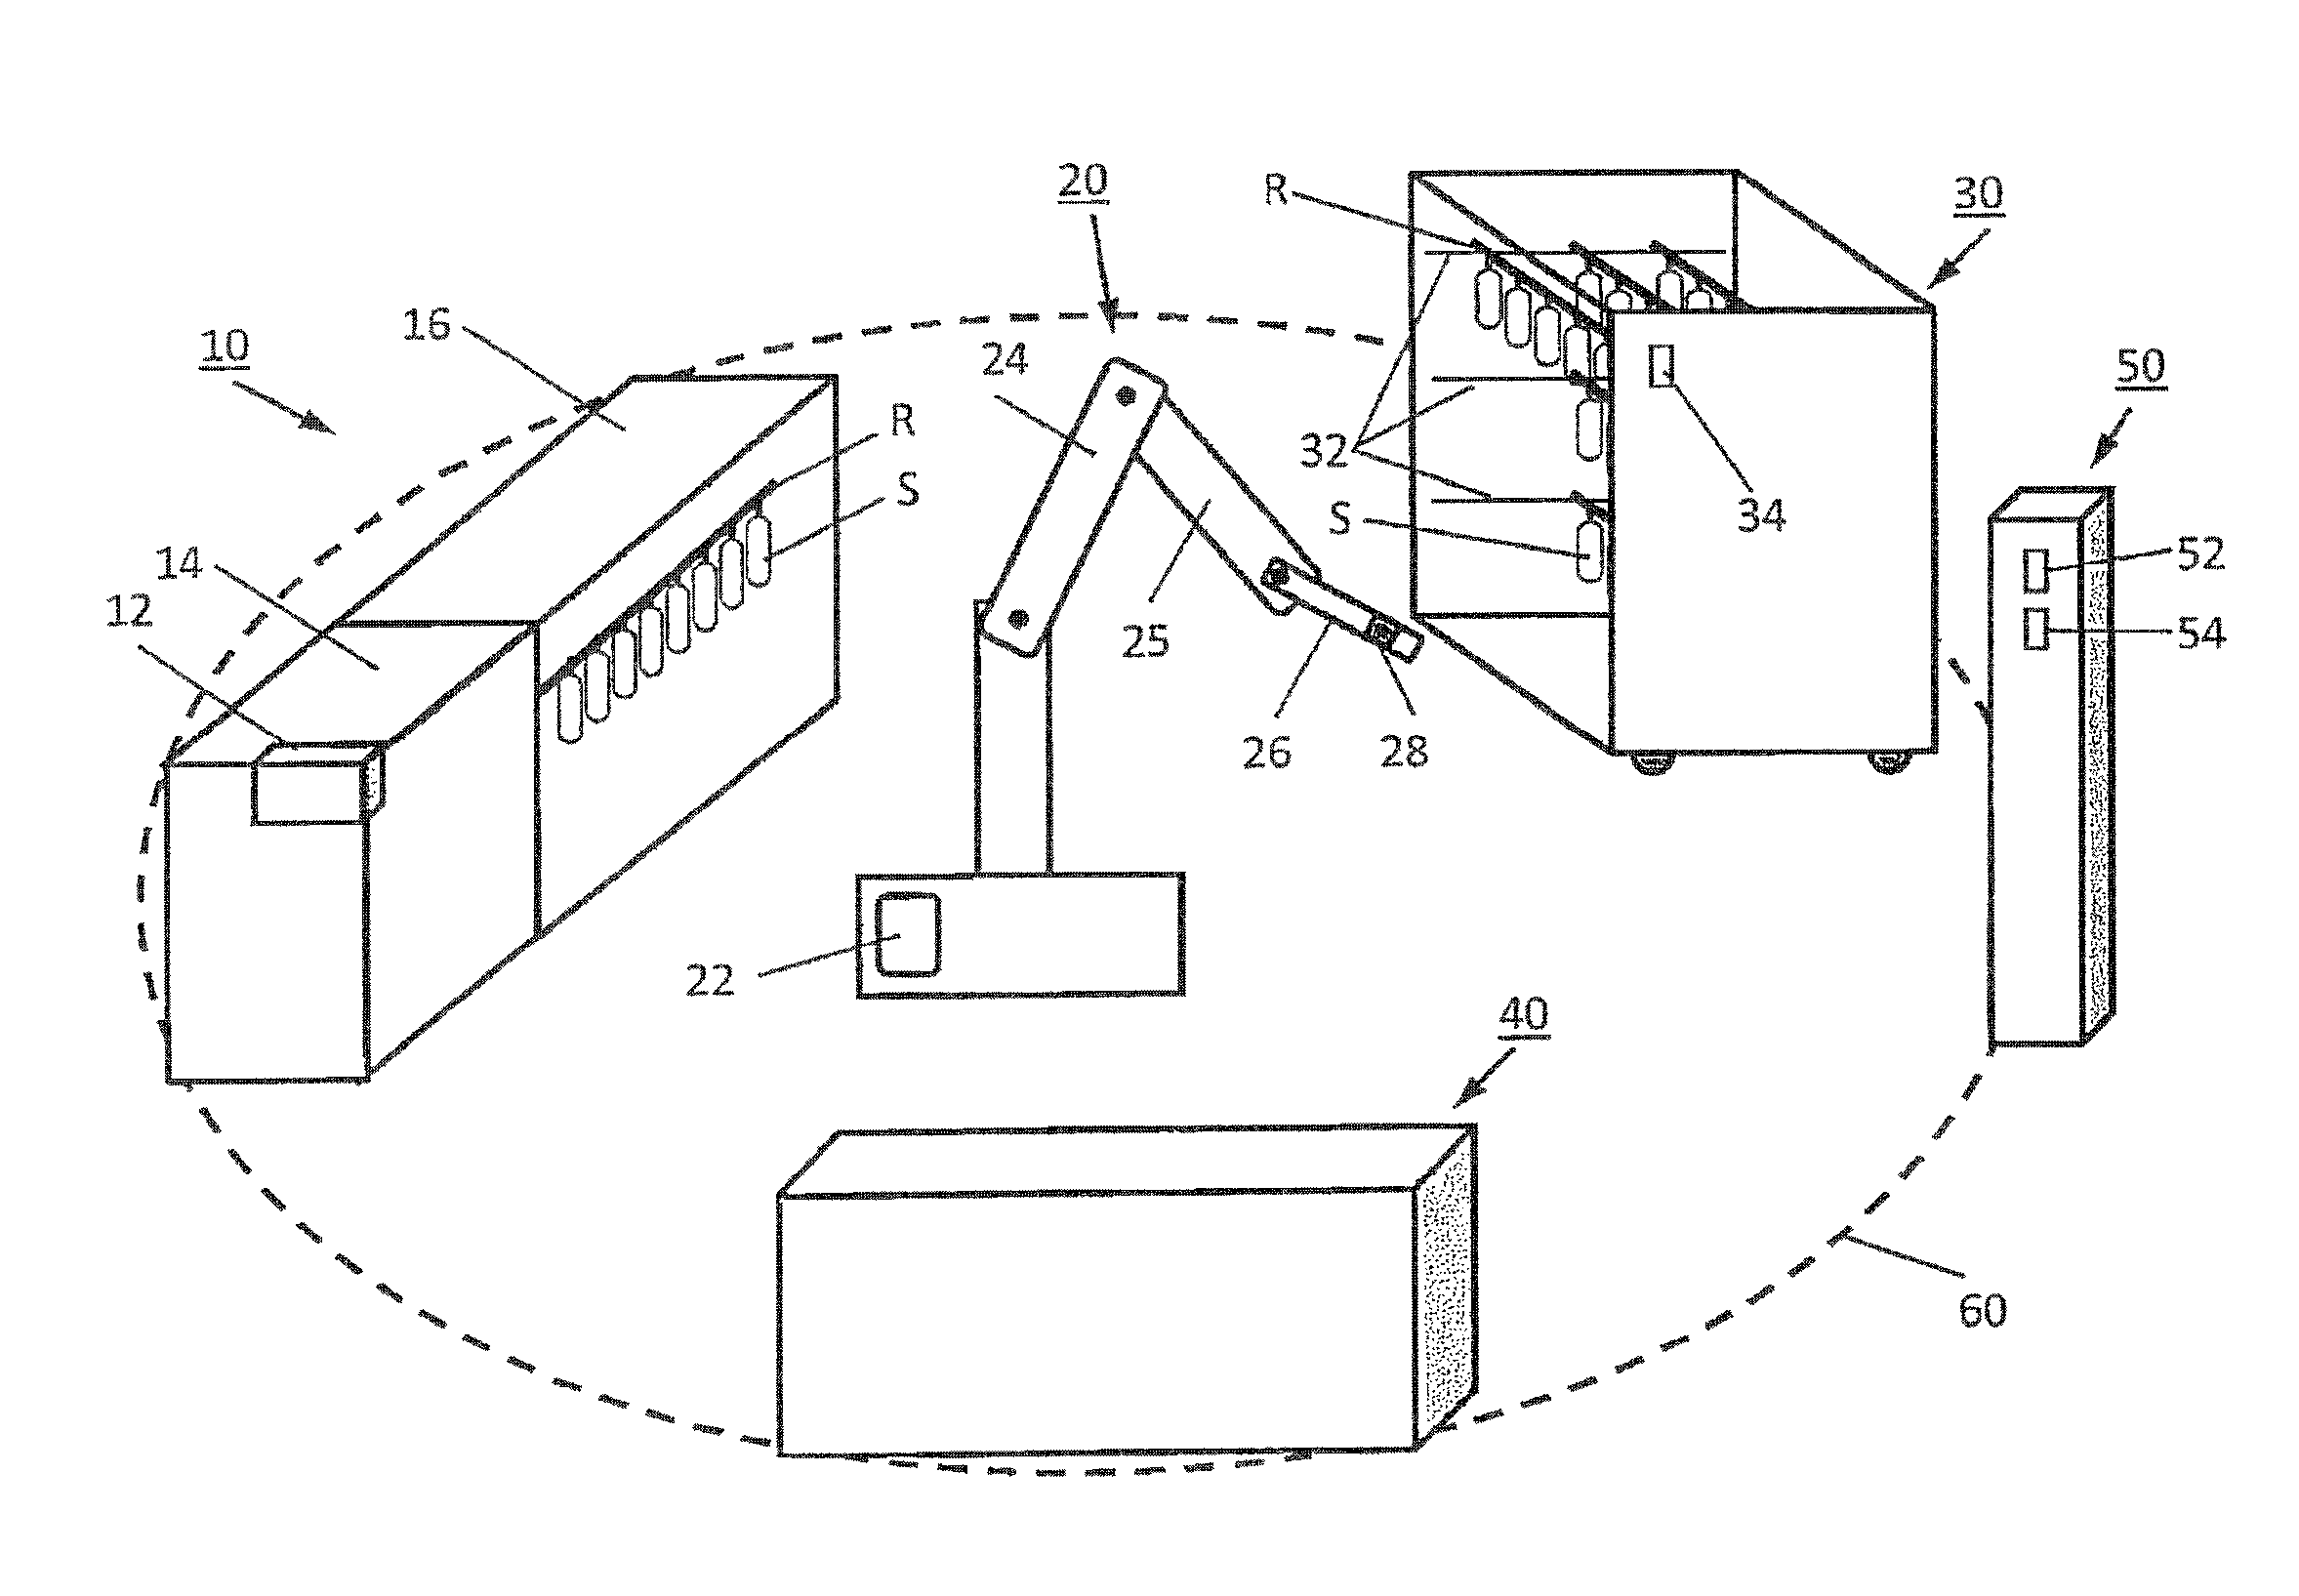 Robotic device for inserting or removing rod-like elements